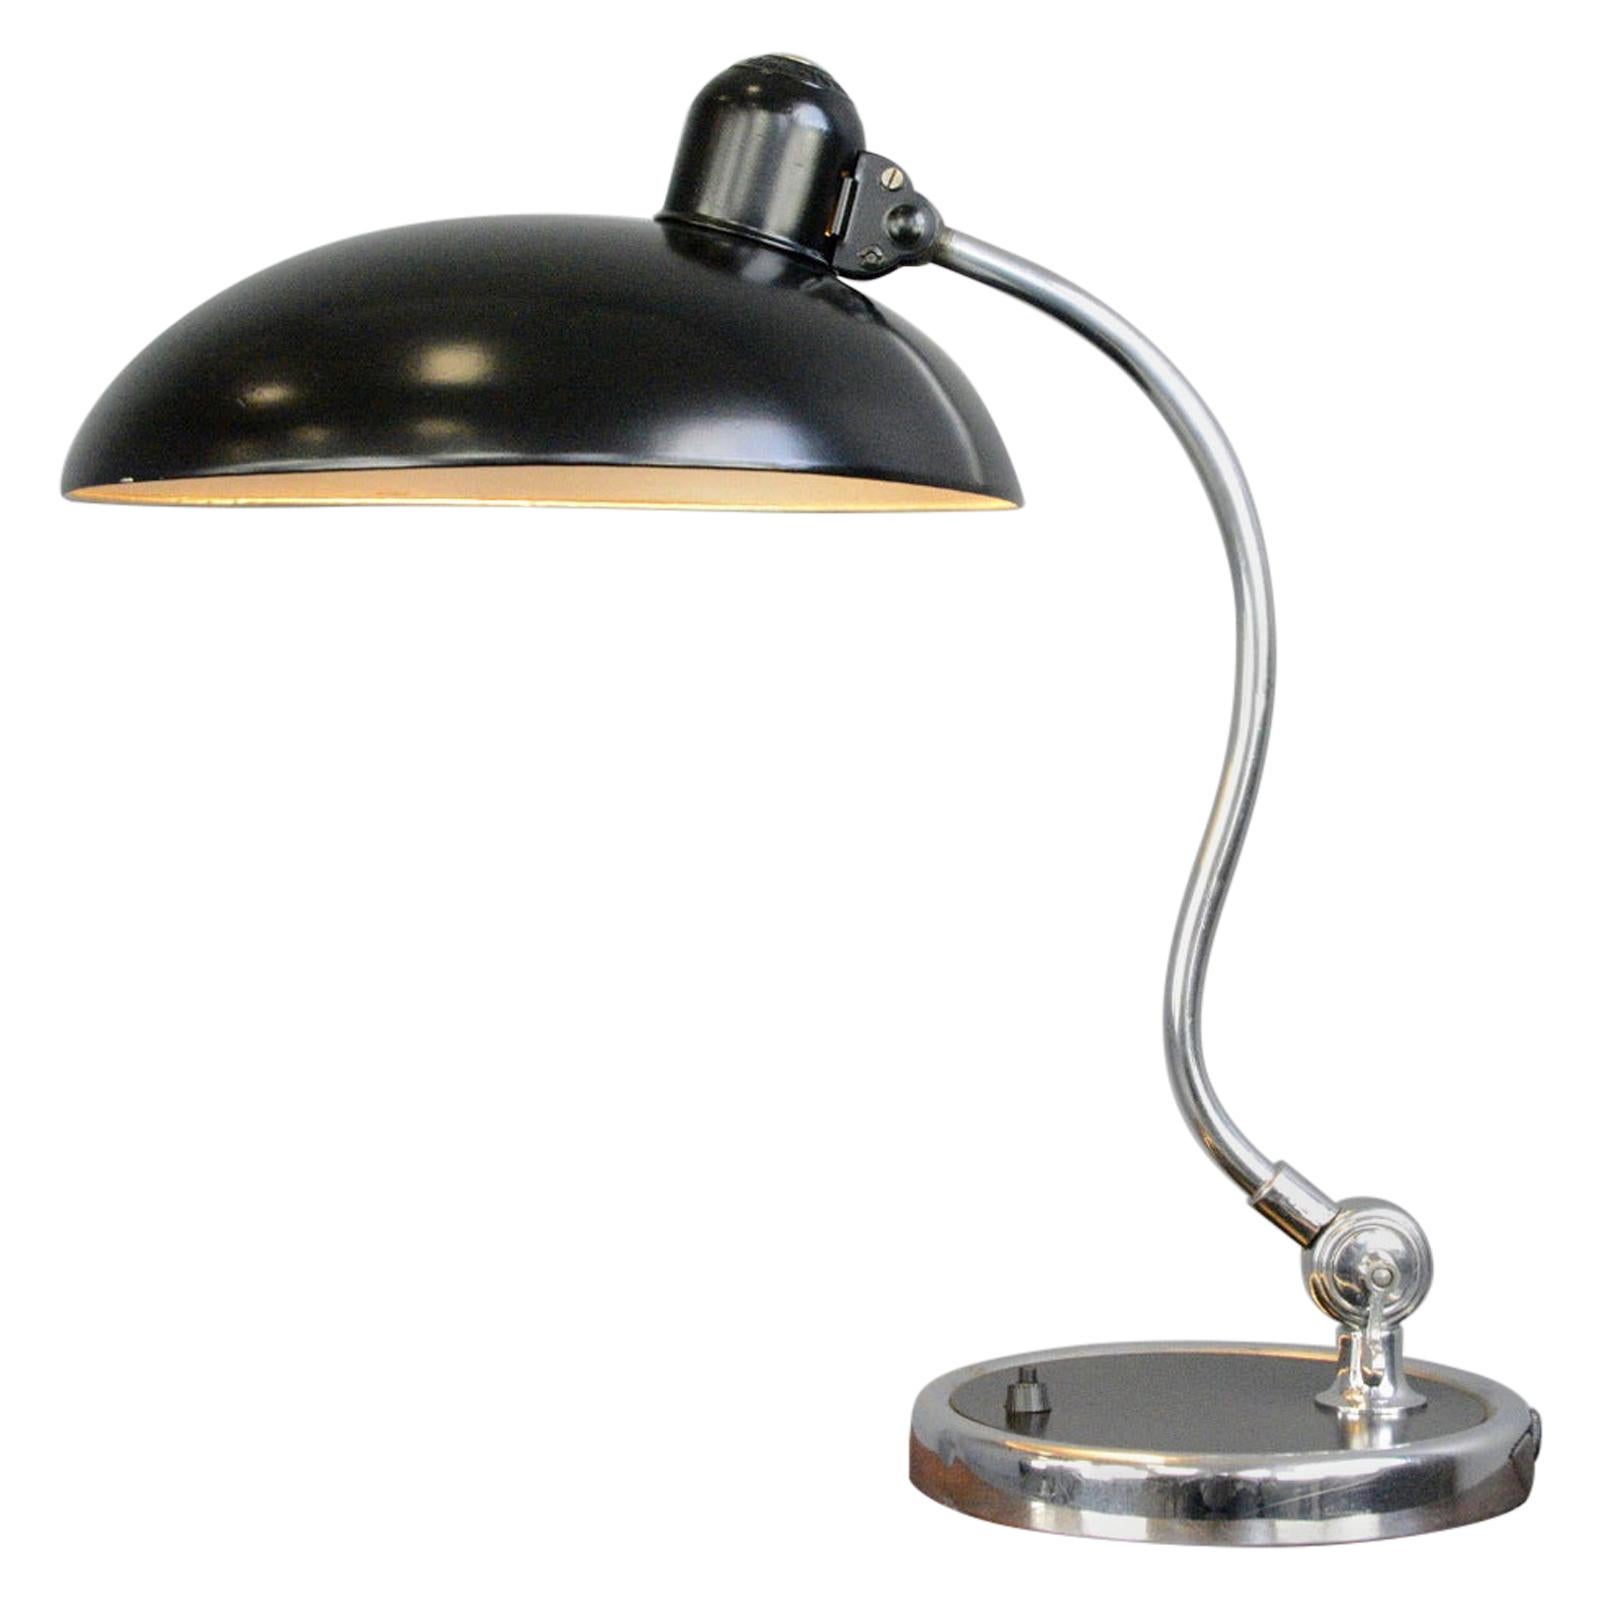 Model 6630 Table Lamp by Kaiser Idell, circa 1930s